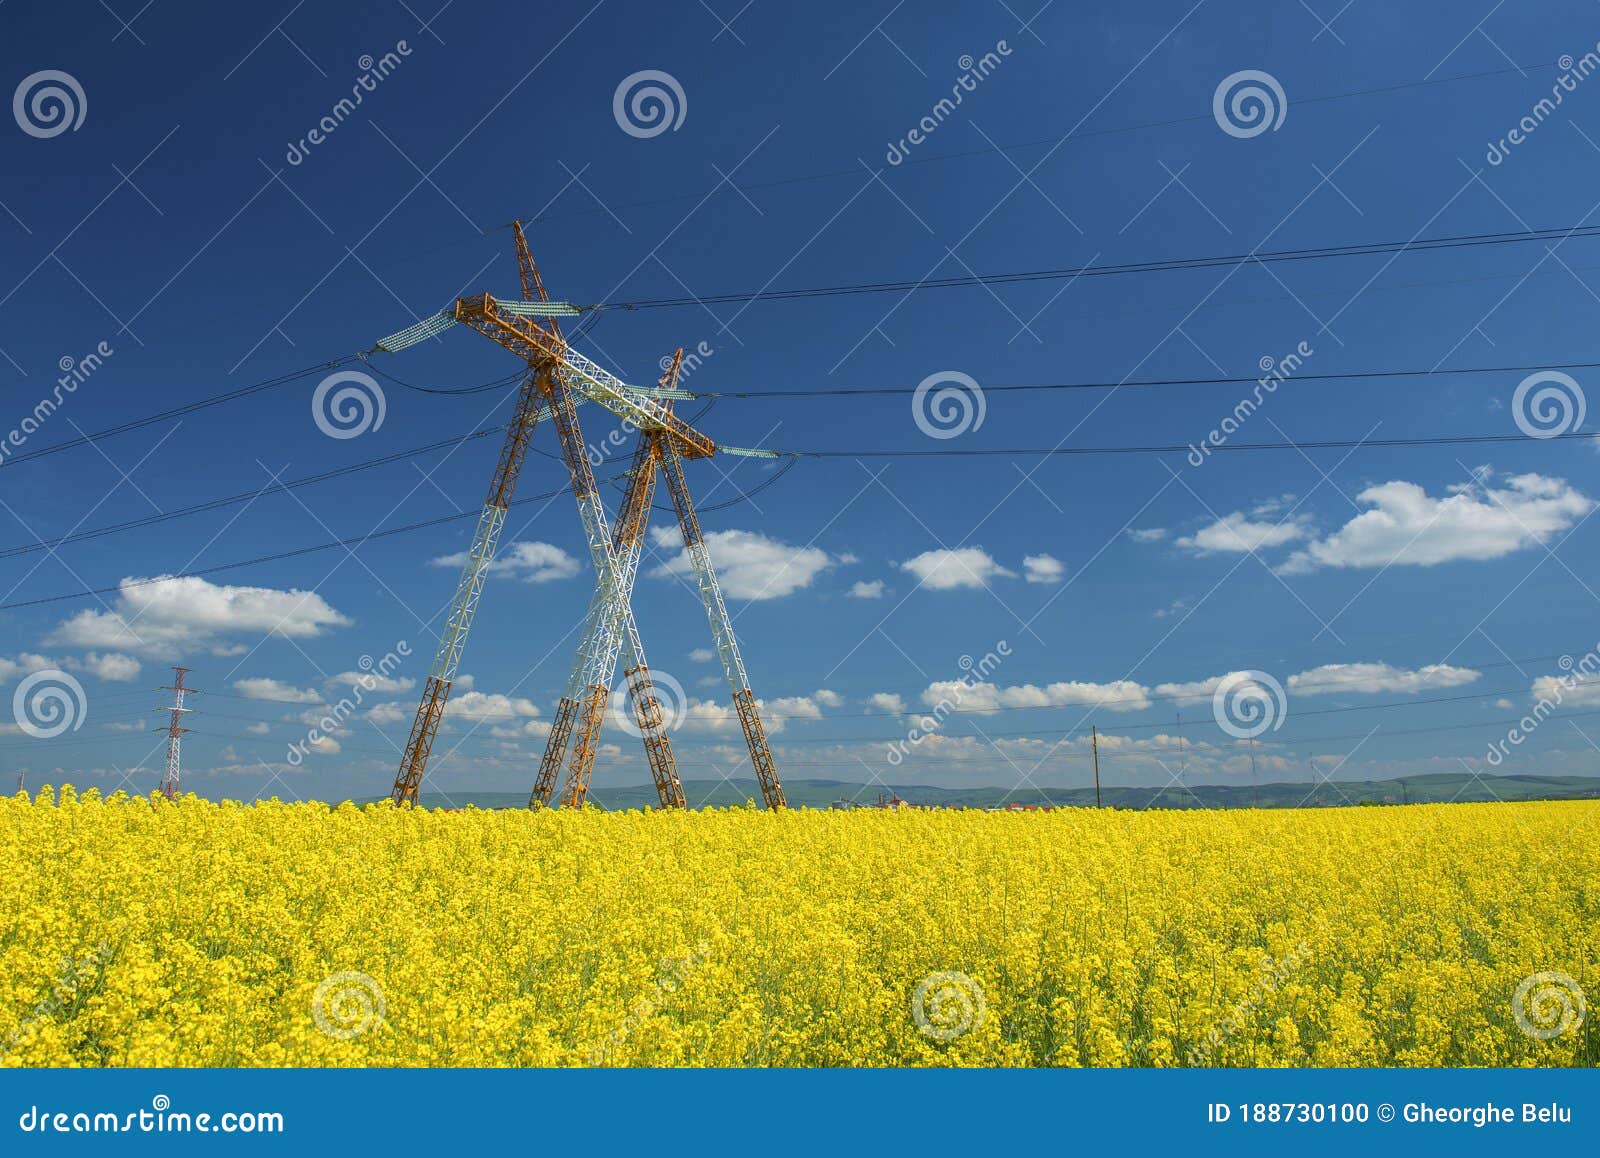 canola field with high-voltage power lines at sun. canola biofuel, organic